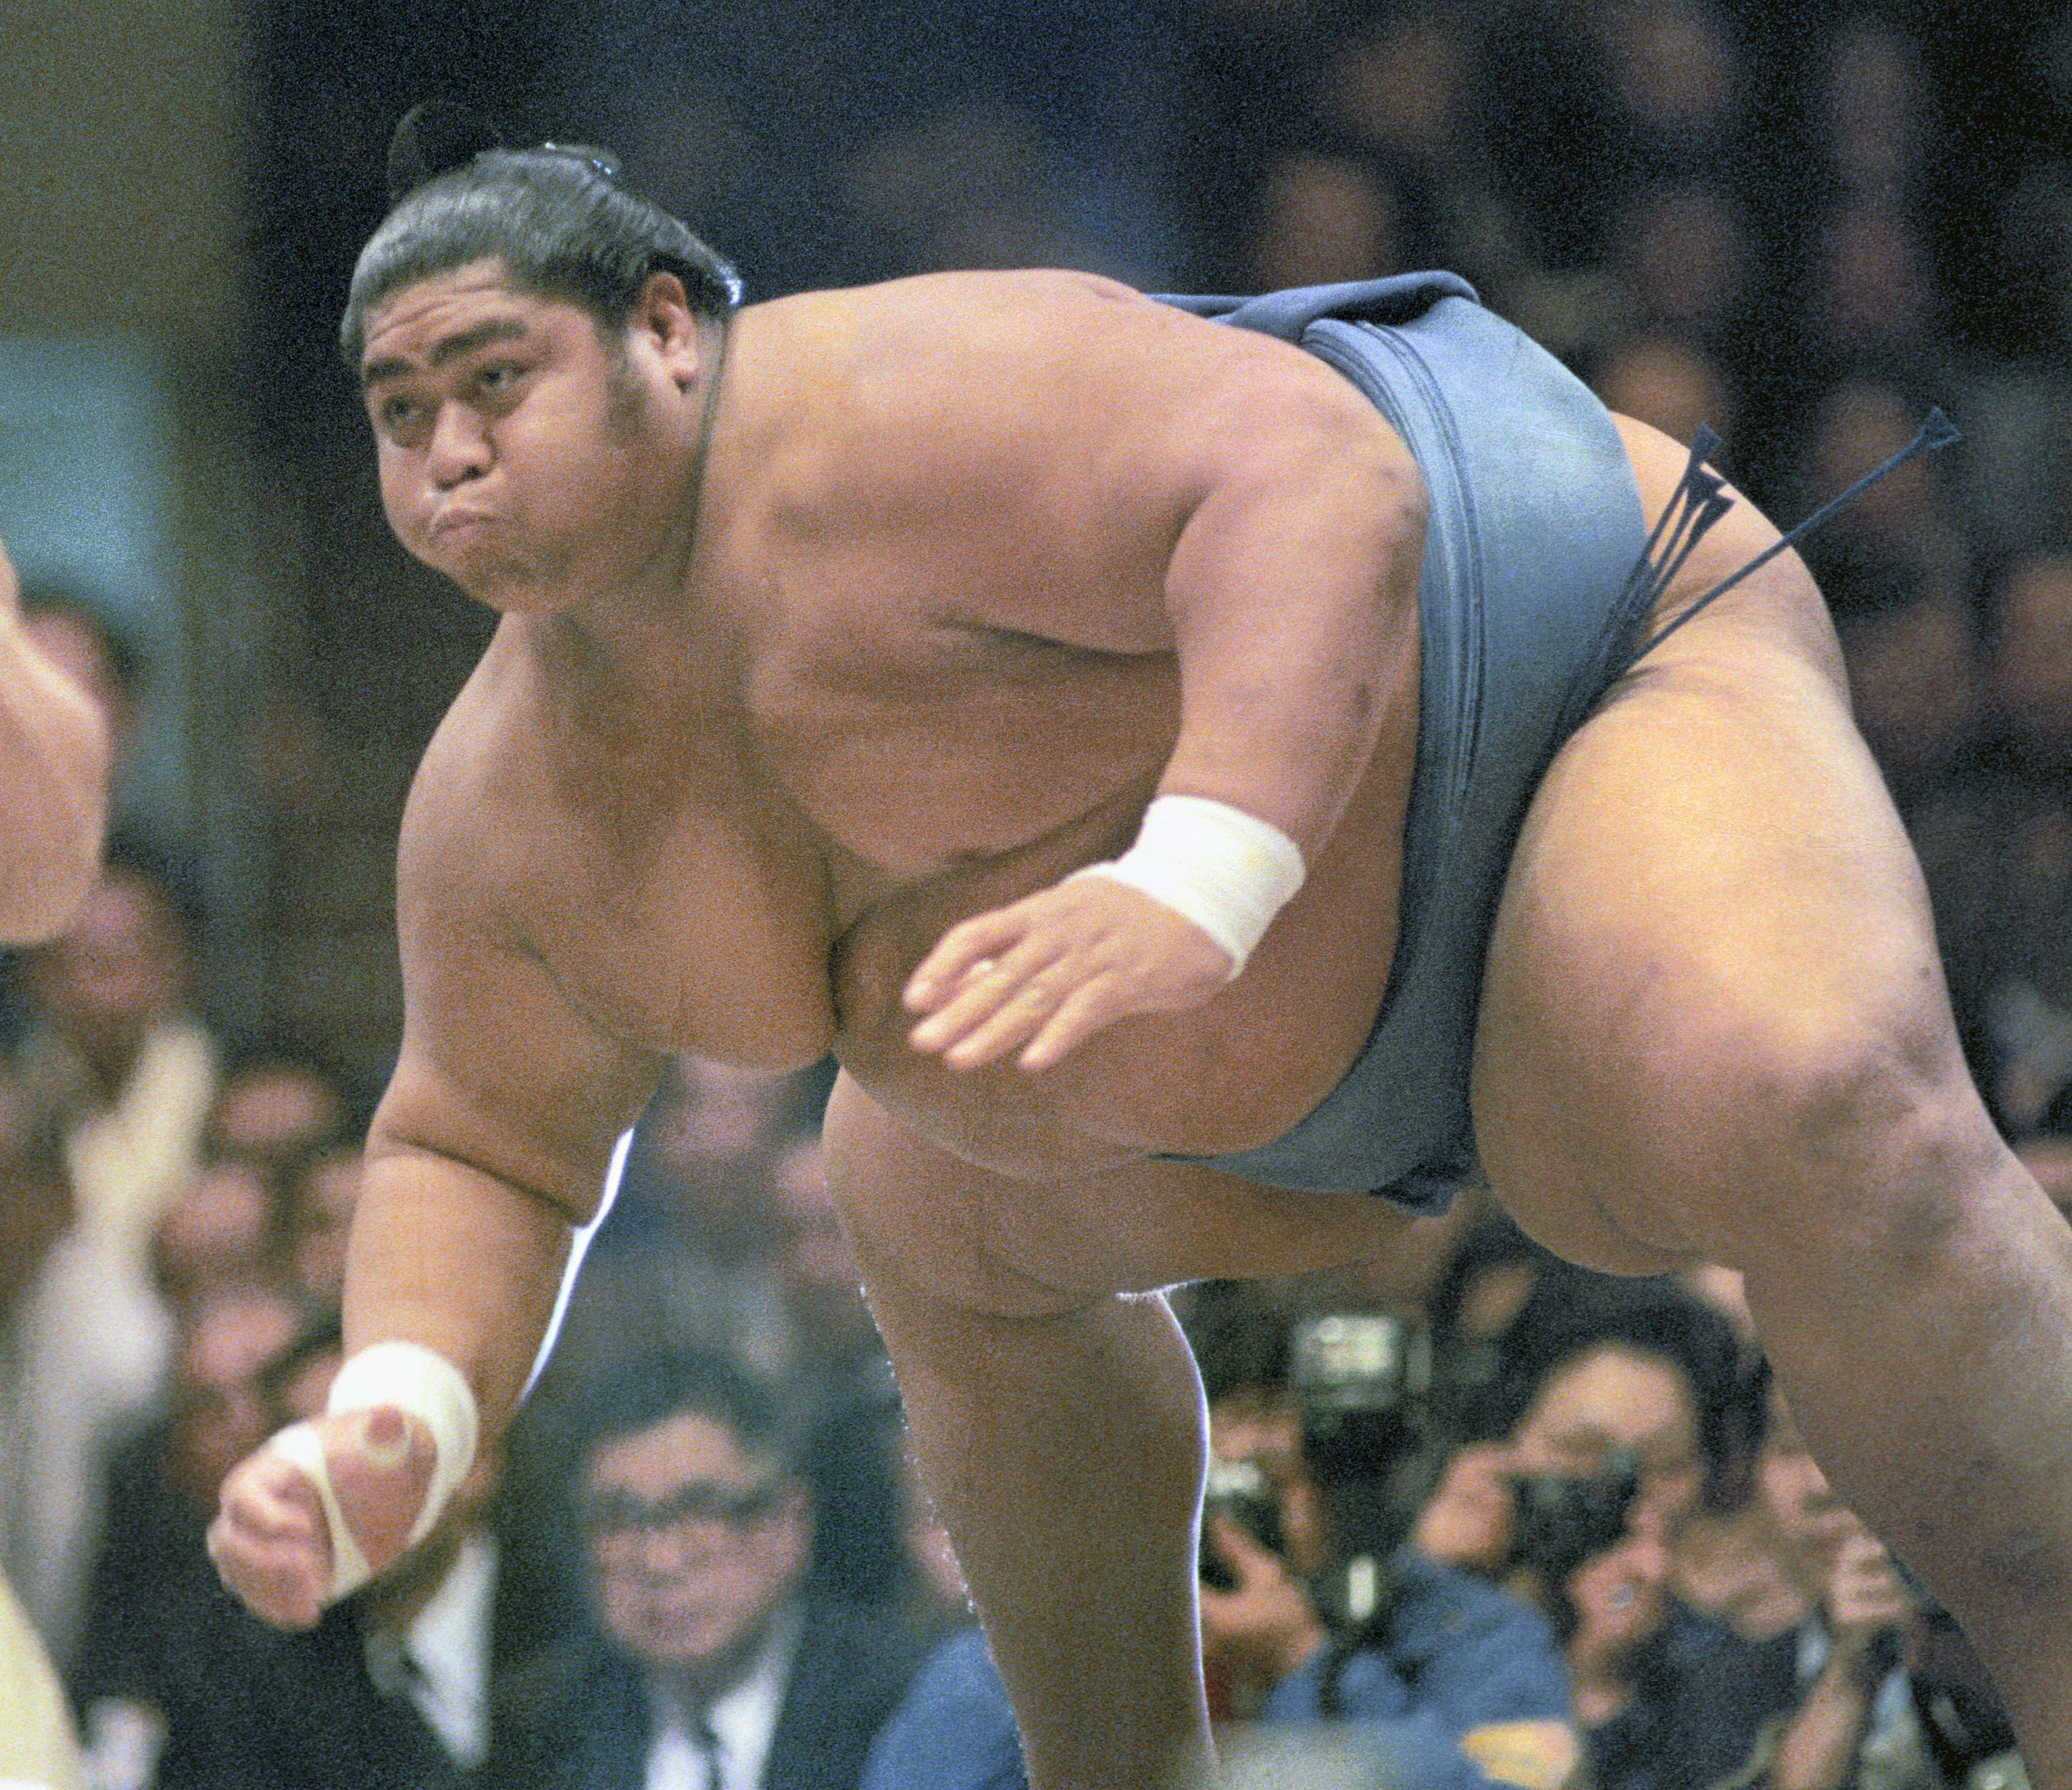 Heavy genes: Weighing 287 kilograms at his peak, Konishiki was the heaviest sumo wrestler ever, earning him the nickname 'The Dump Truck.' | KYODO